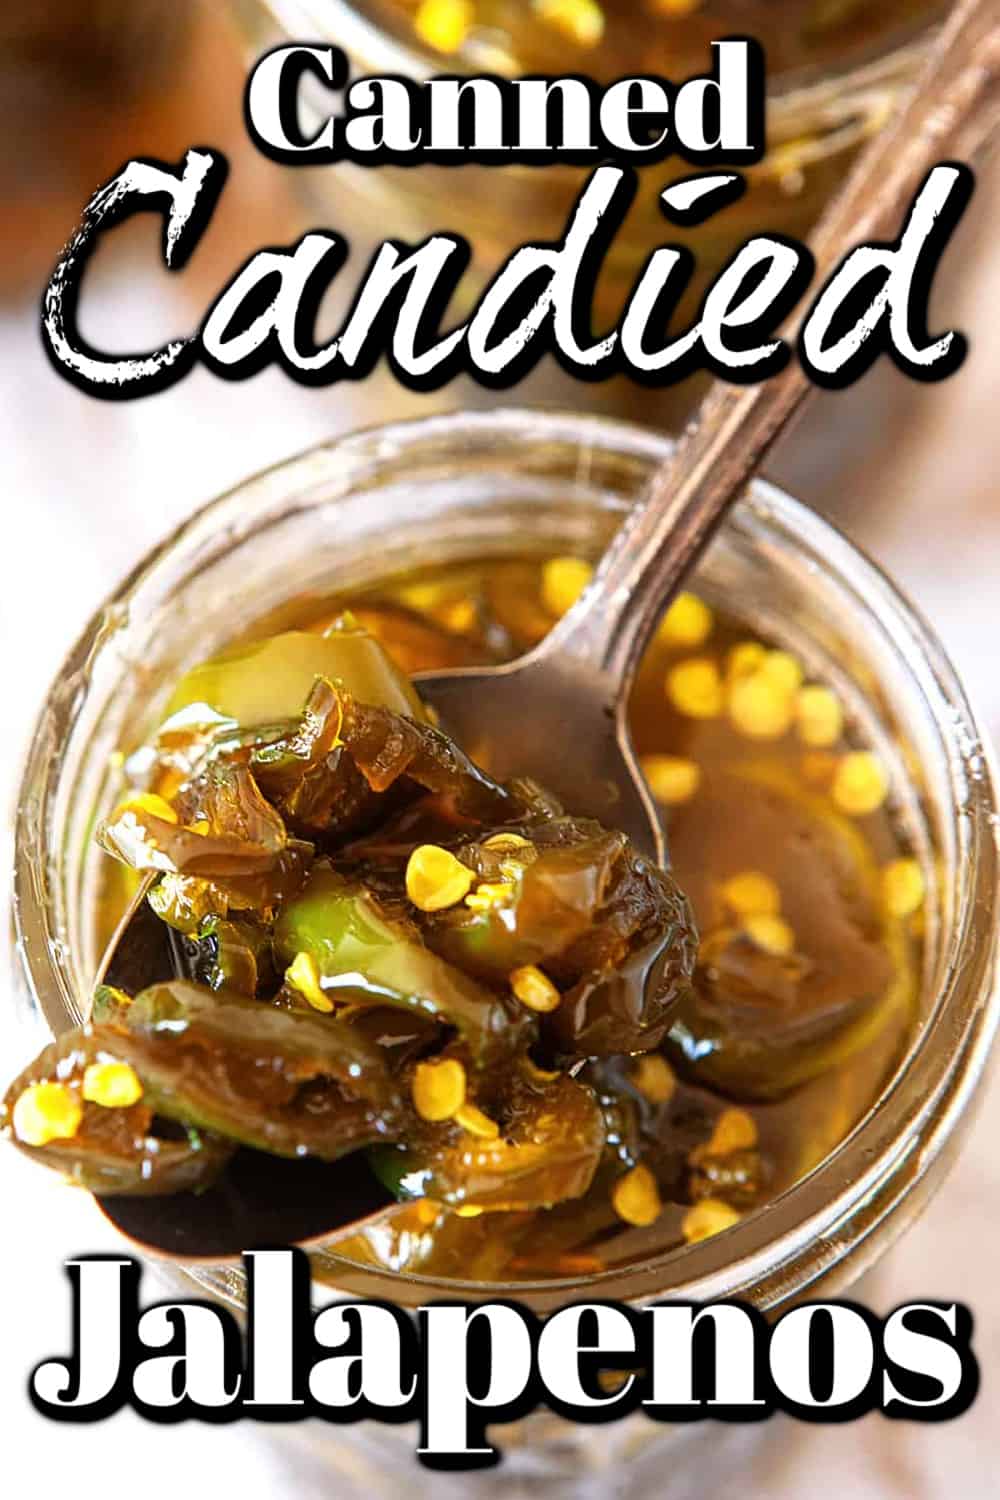 Canned Candied Jalapenos Pin